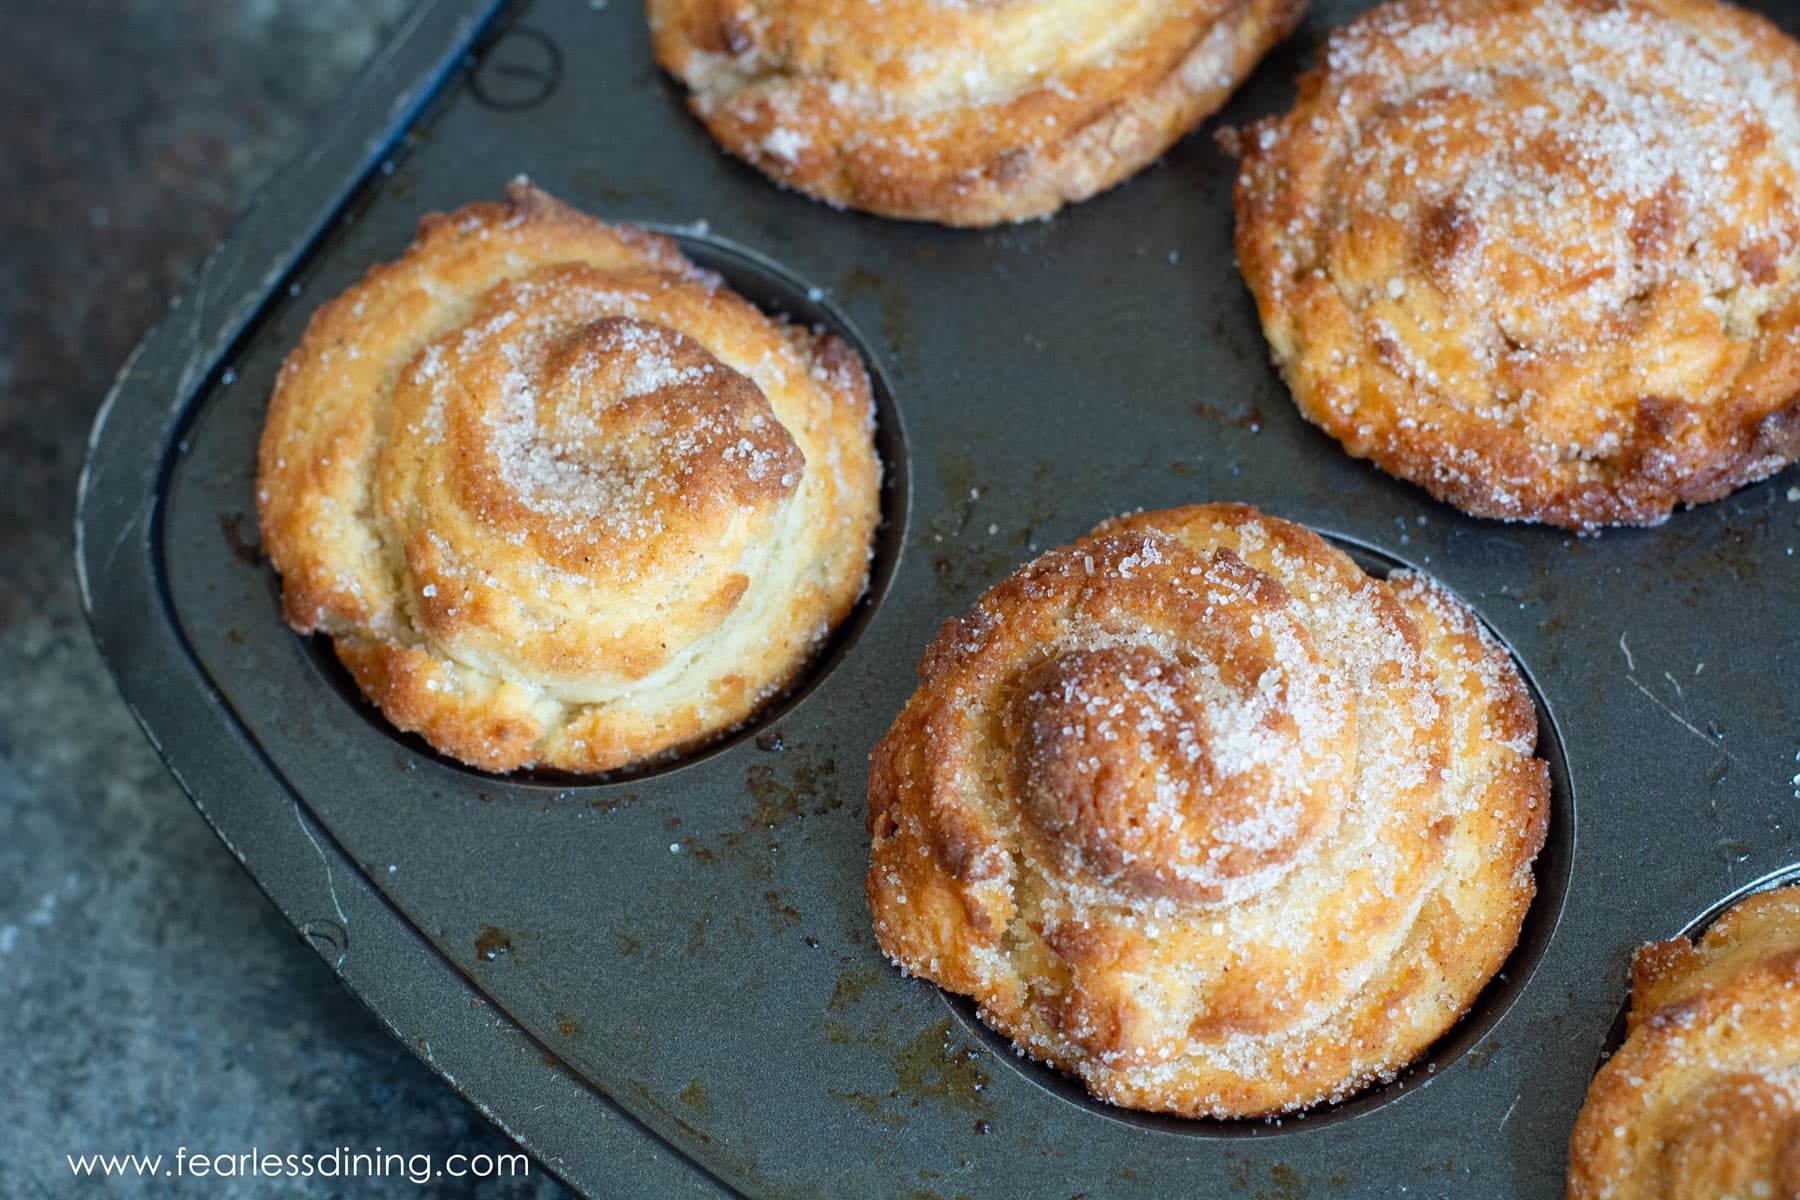 Baked cruffins in a muffin pan.